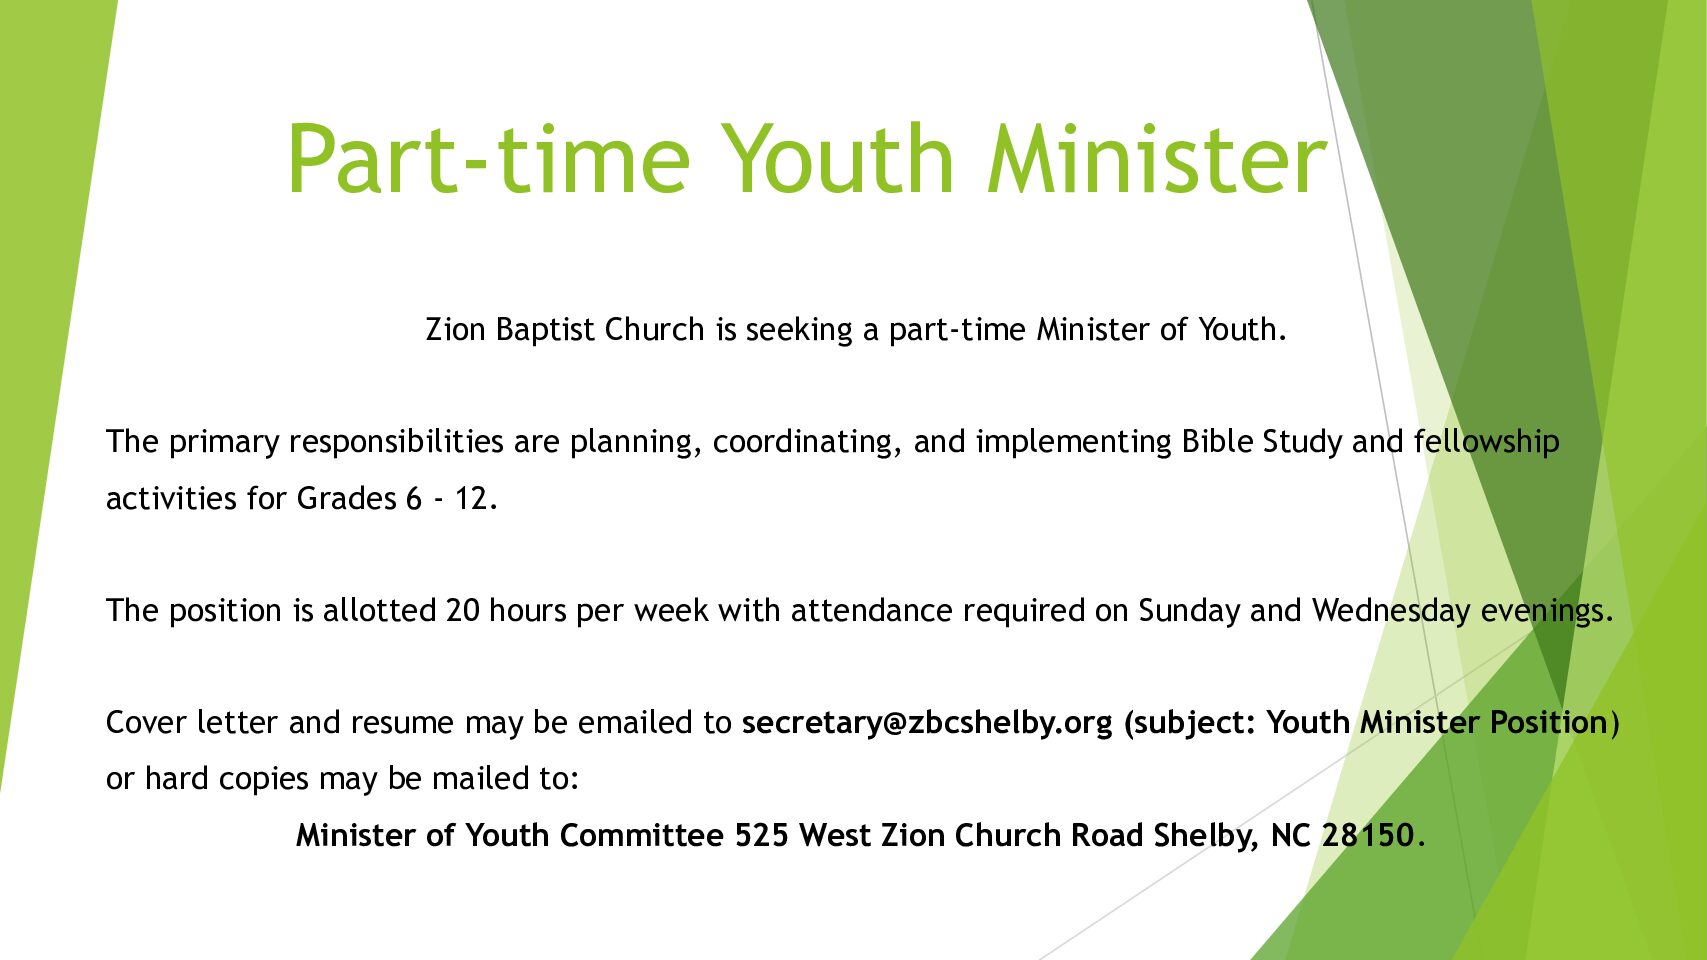 Part-time Youth Minister